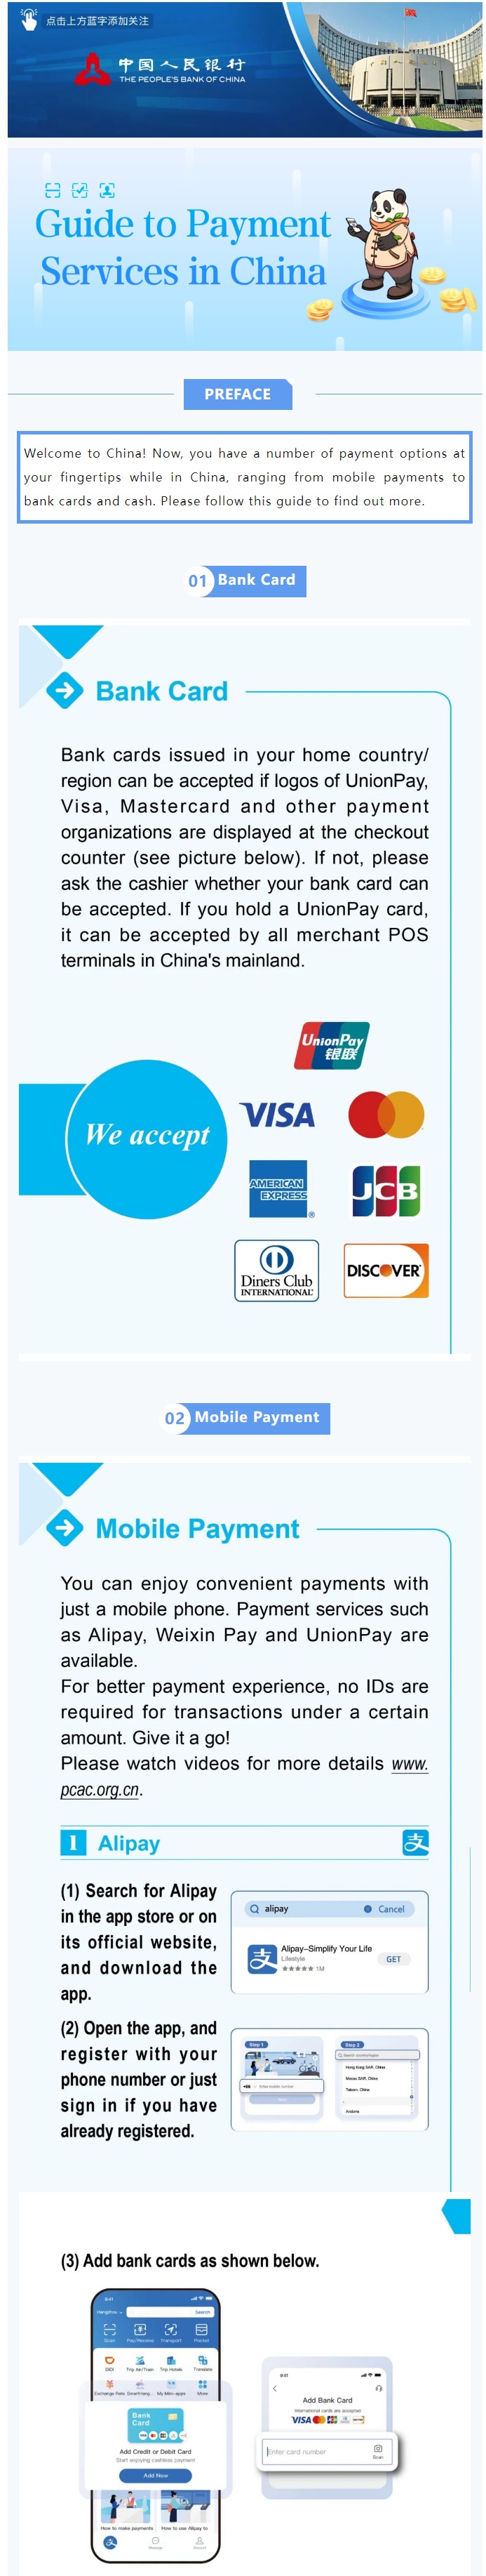 20240314-Guide to Payment Services in China 01.jpg